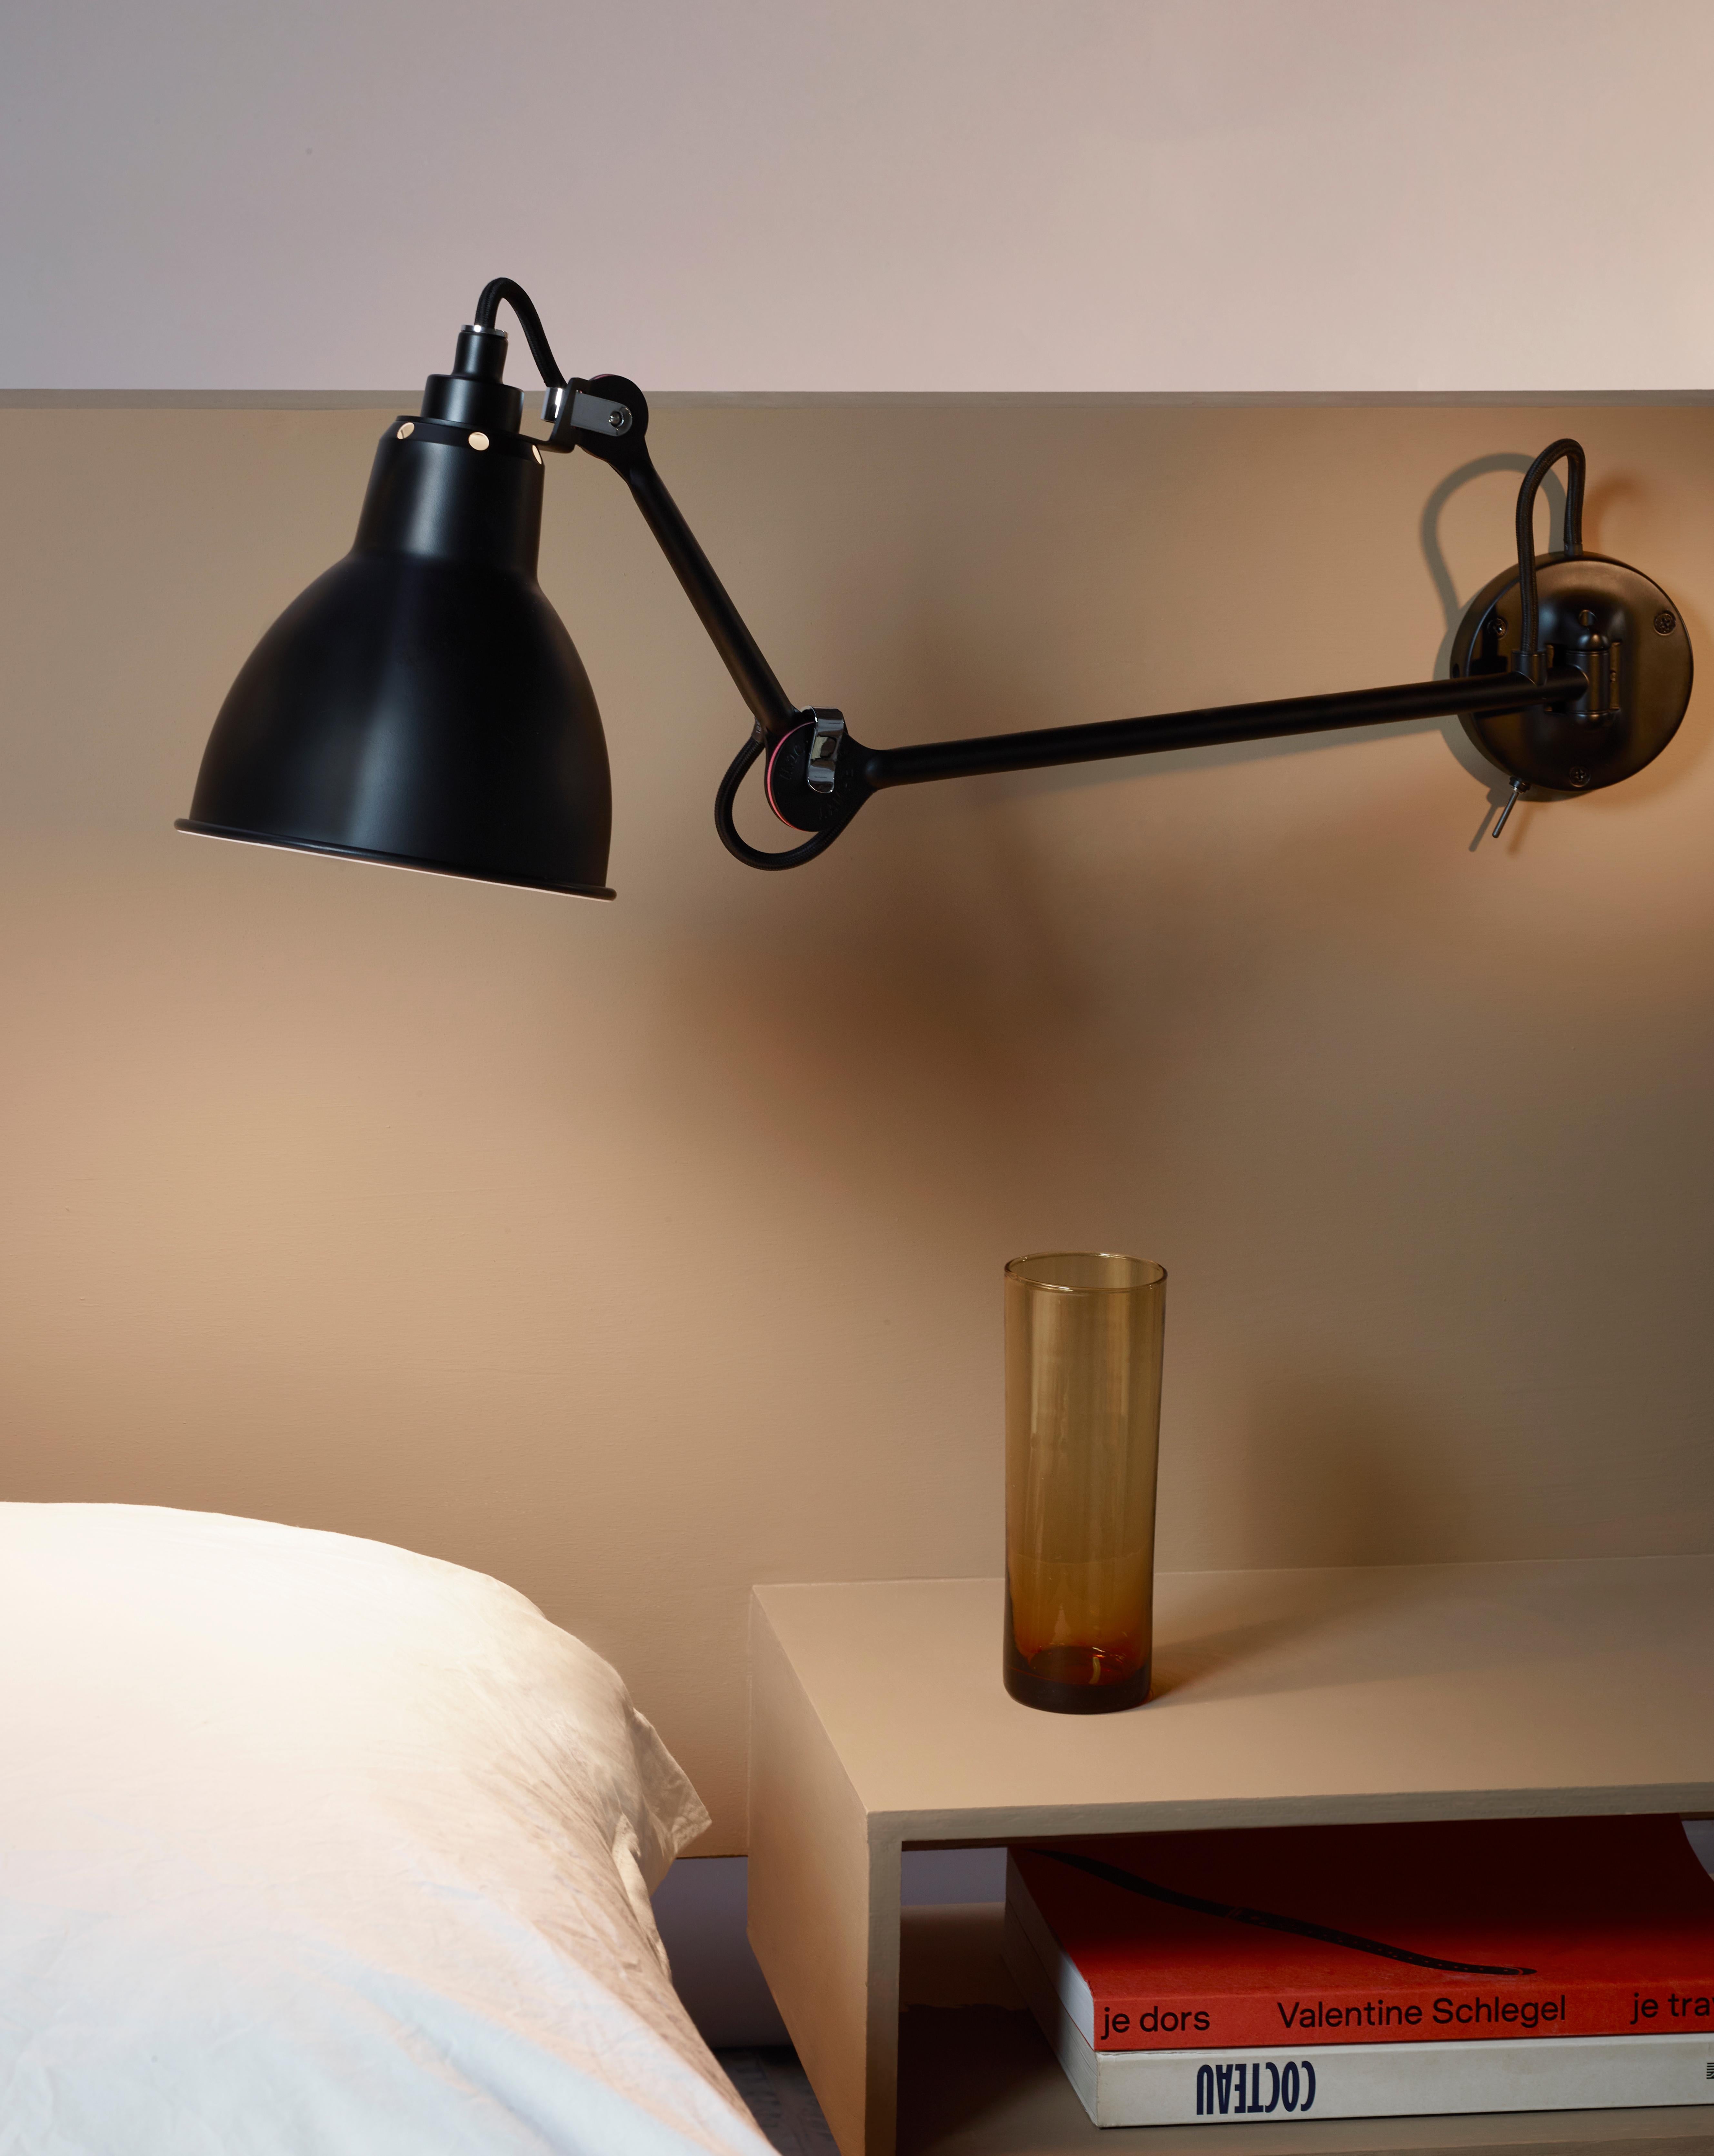 DCW Editions Lampe Gras N°204 SW Wall Lamp in Black Steel Arm and Copper Shade by Bernard-Albin Gras
 
 In 1921 Bernard-Albin GRAS designed a series of lamps for use in offices and in industrial environments. The GRAS lamp, as it was subsequently